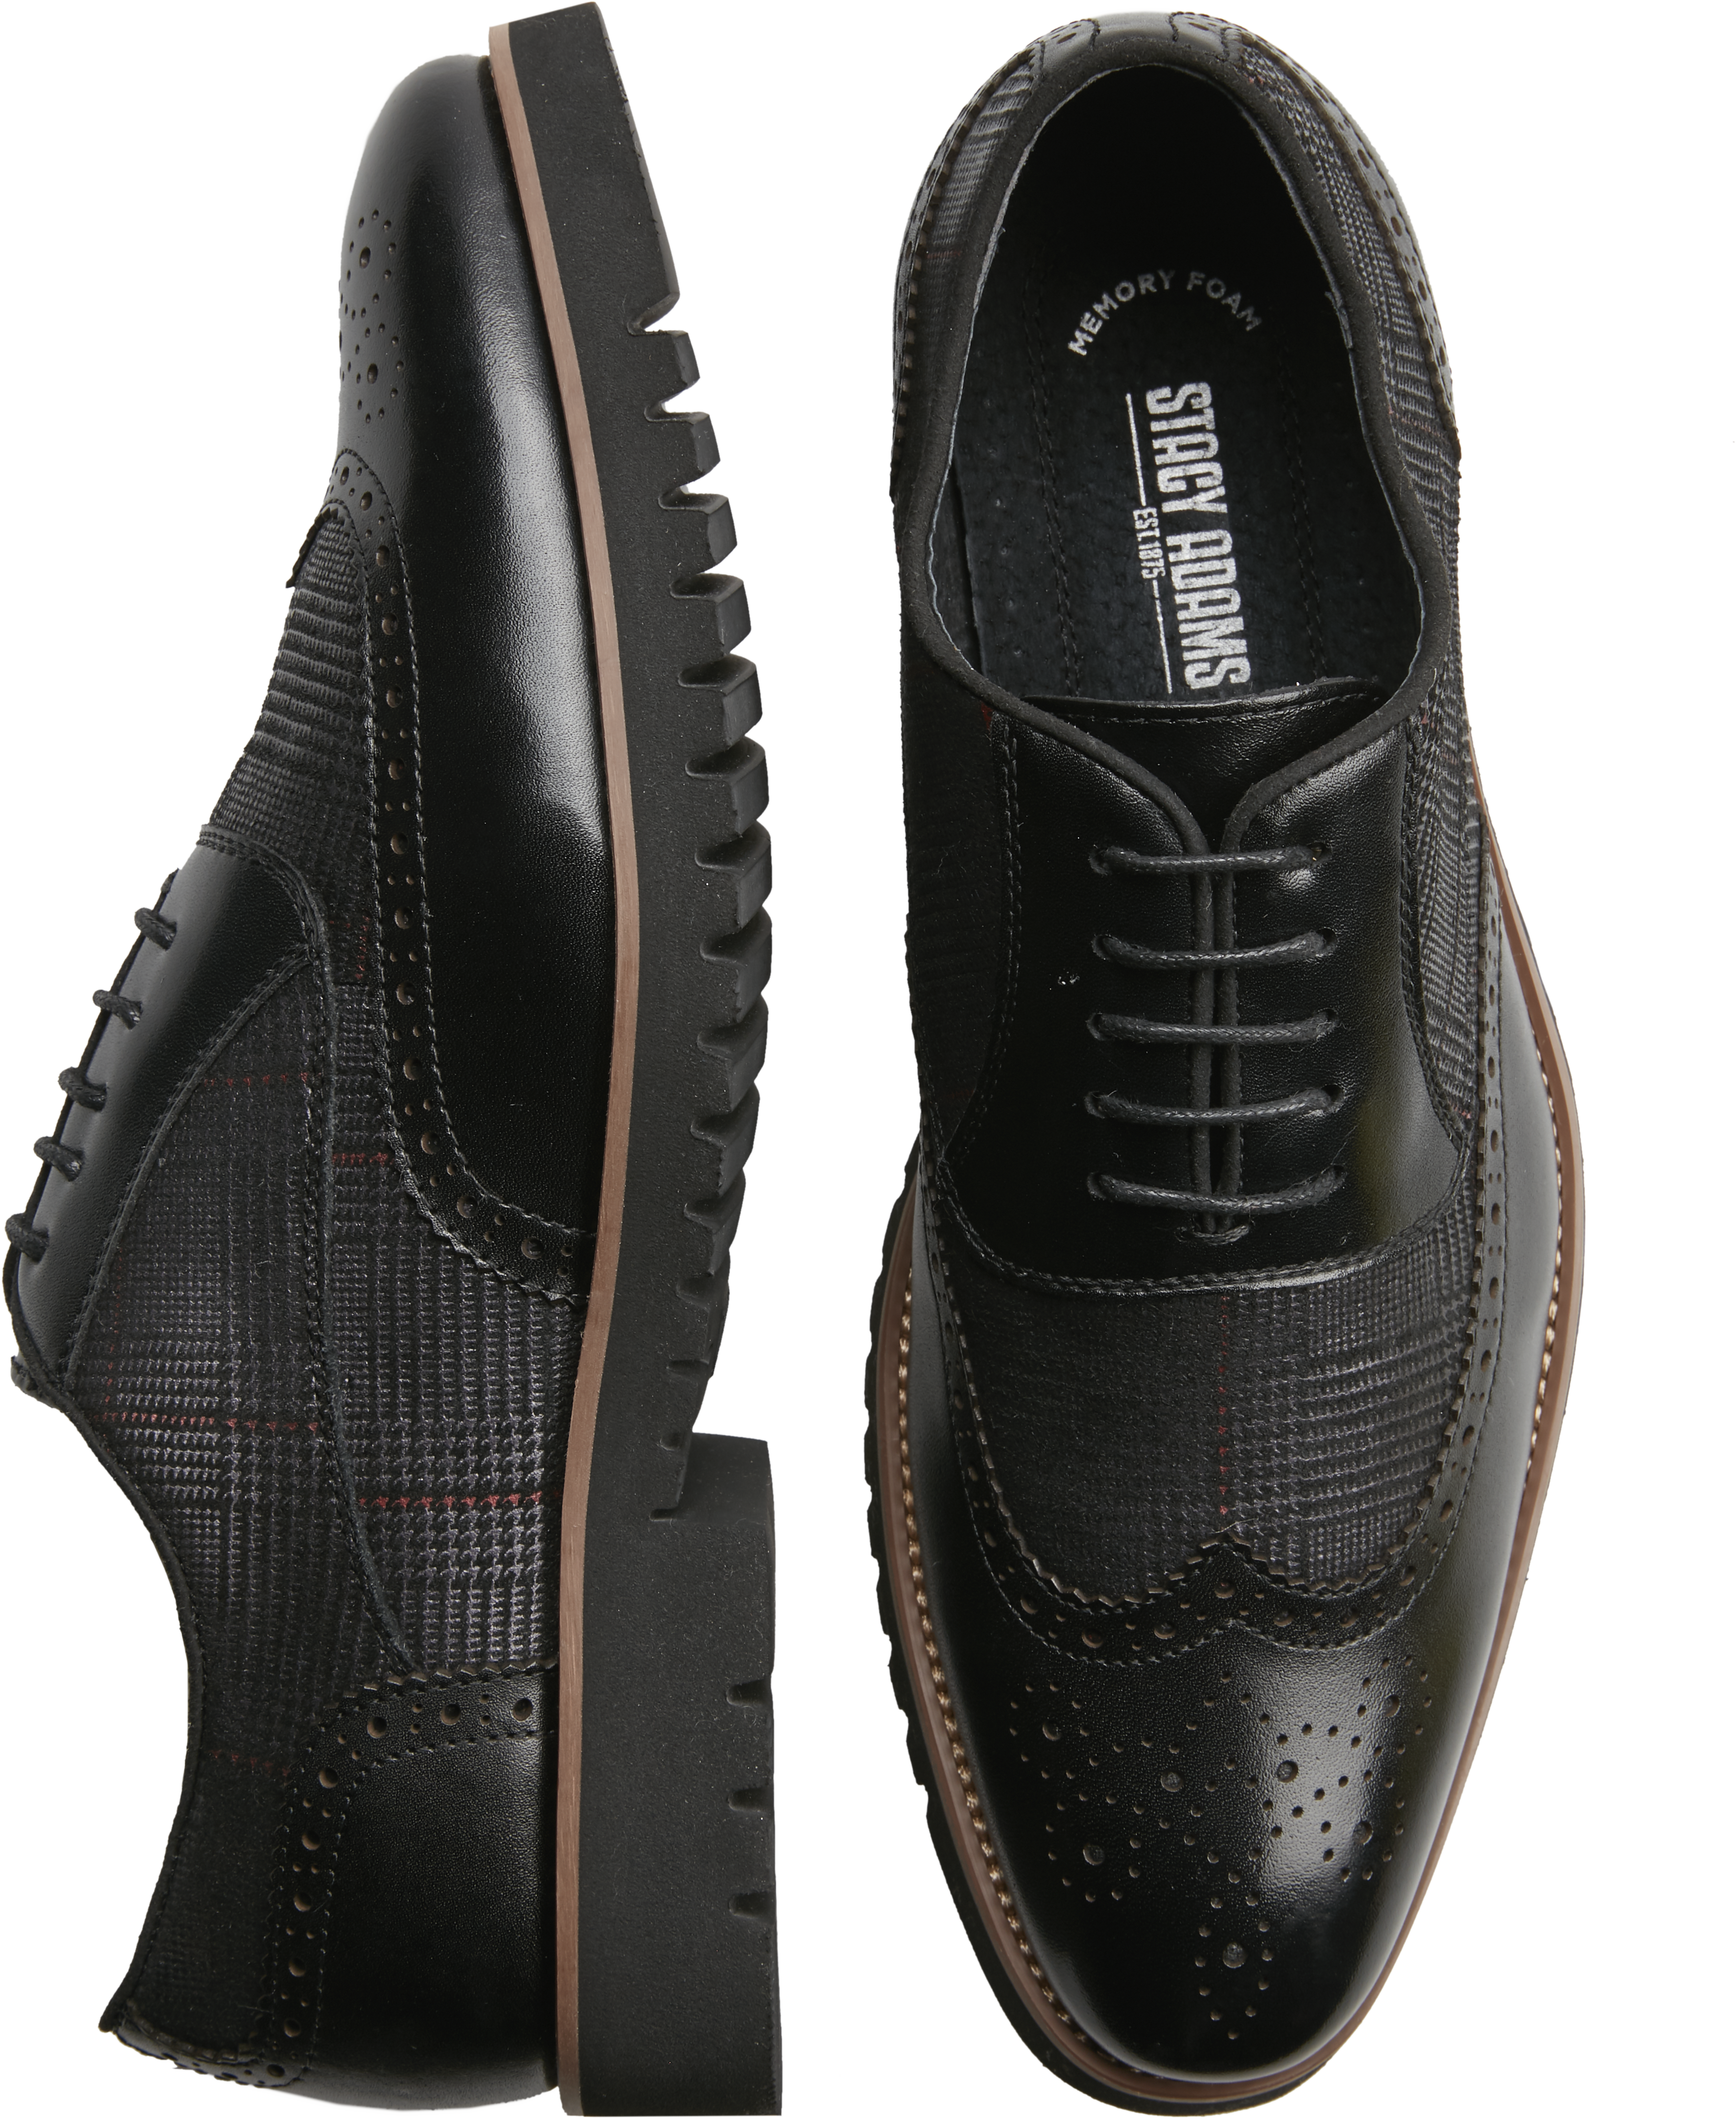 black and white wingtip oxfords